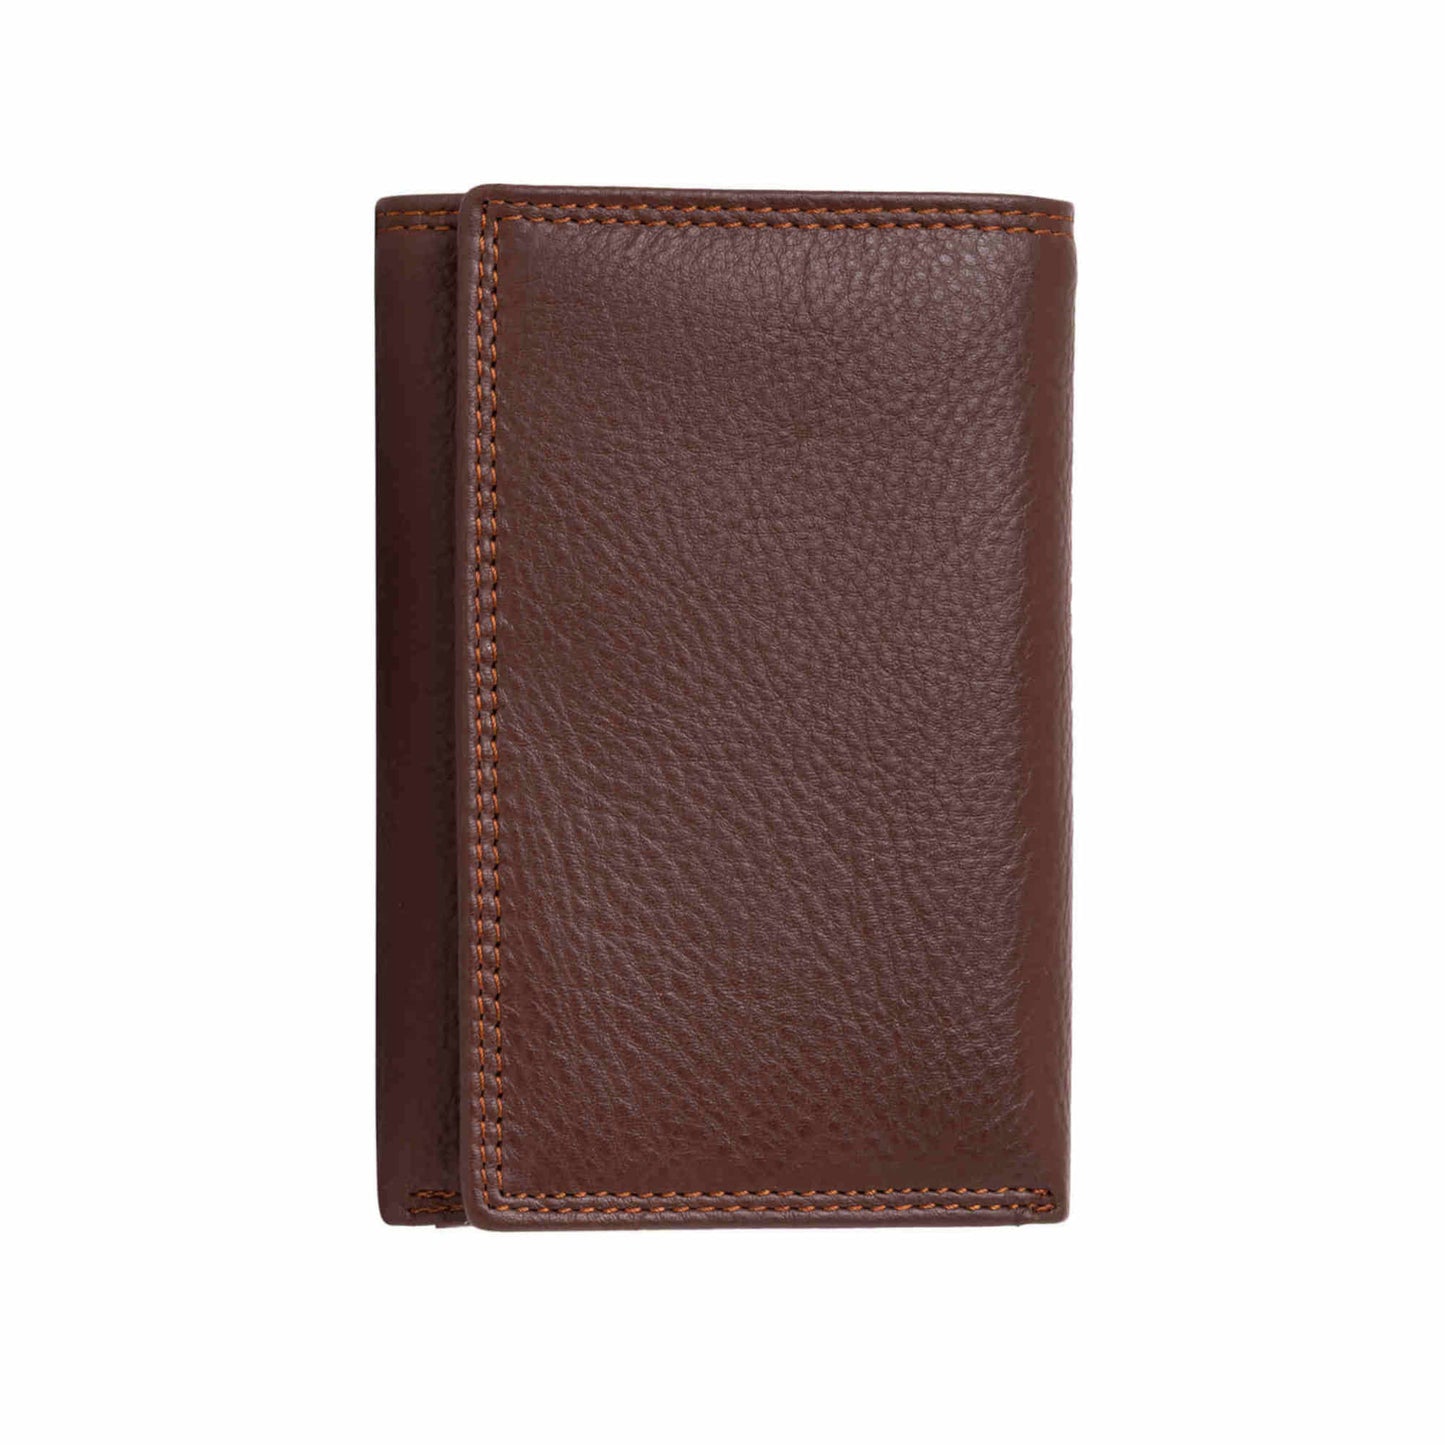 Style n Craft 391109 Ladies Trifold Brown Leather Wallet with Snap Button Closure - Front View Closed